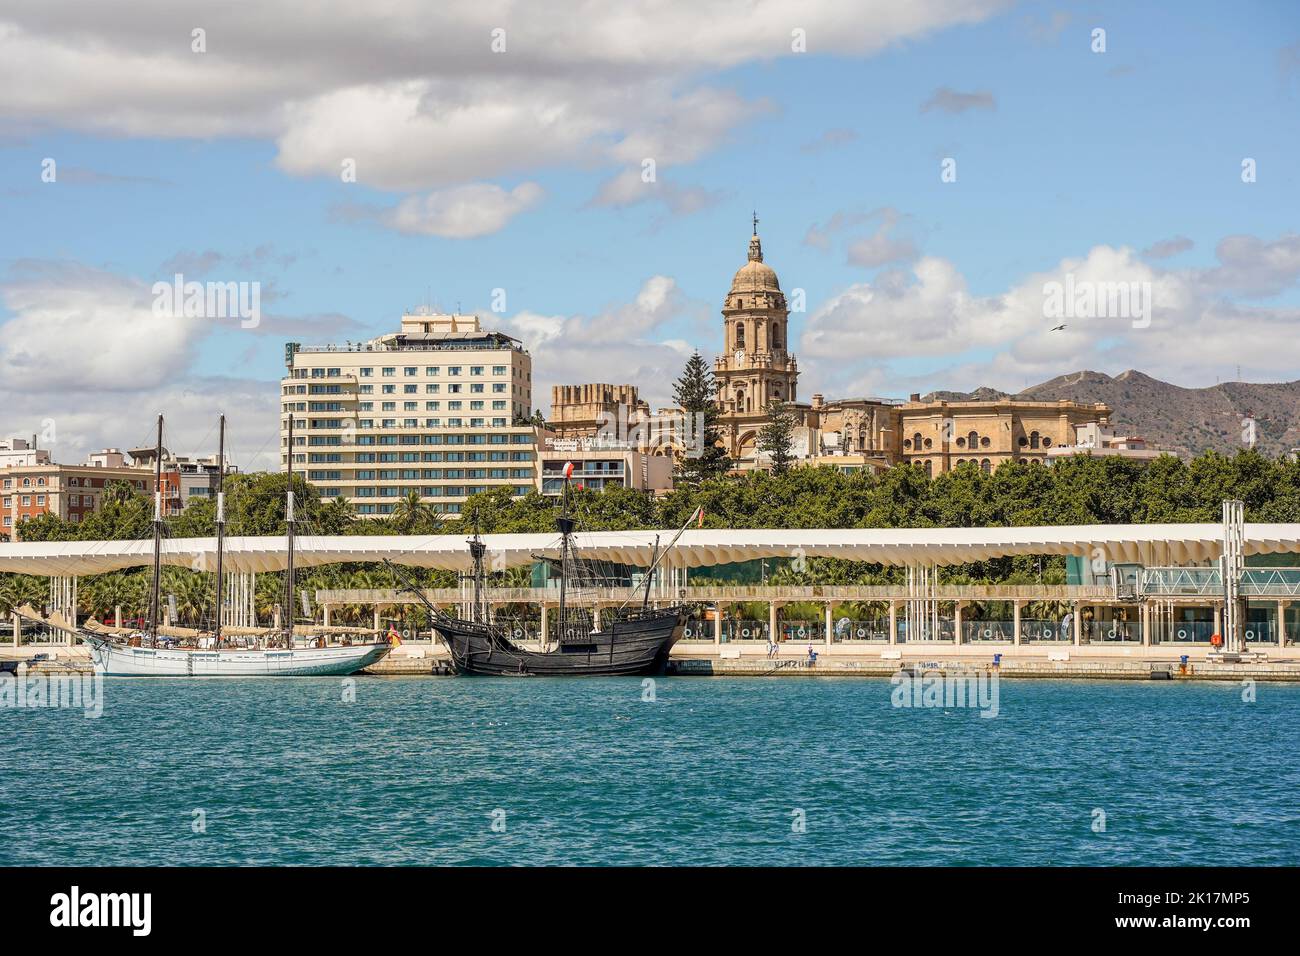 Three replicas of old sailing ships, Nao Victoria, Pascual Flores, moored in the port of Malaga, Cathedral behind, Andalucia, Spain. Stock Photo